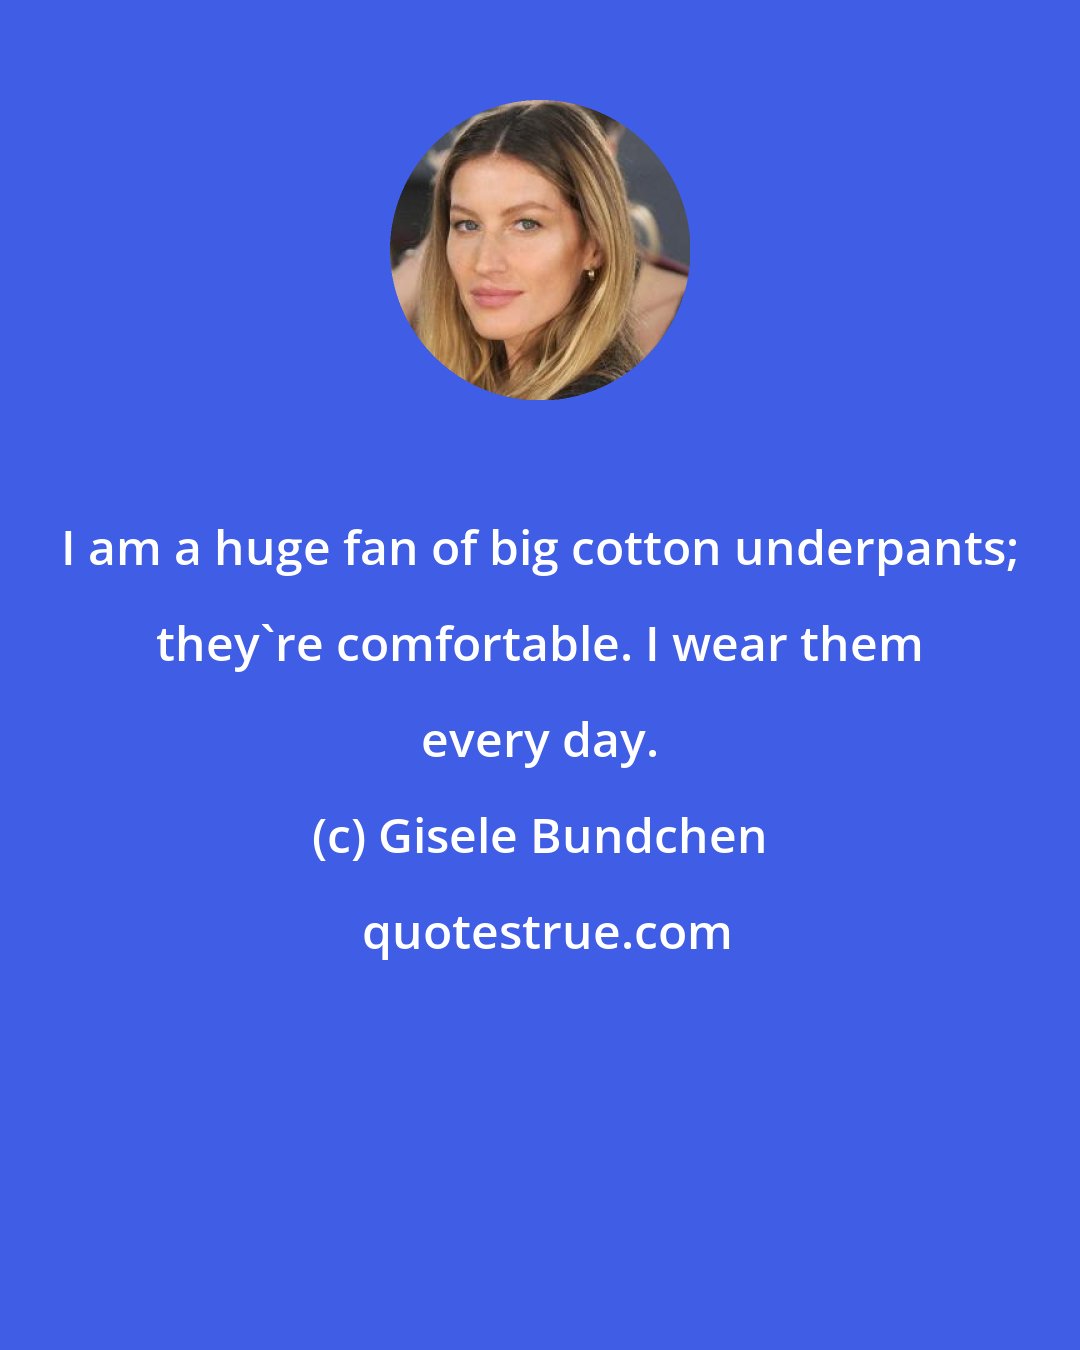 Gisele Bundchen: I am a huge fan of big cotton underpants; they're comfortable. I wear them every day.